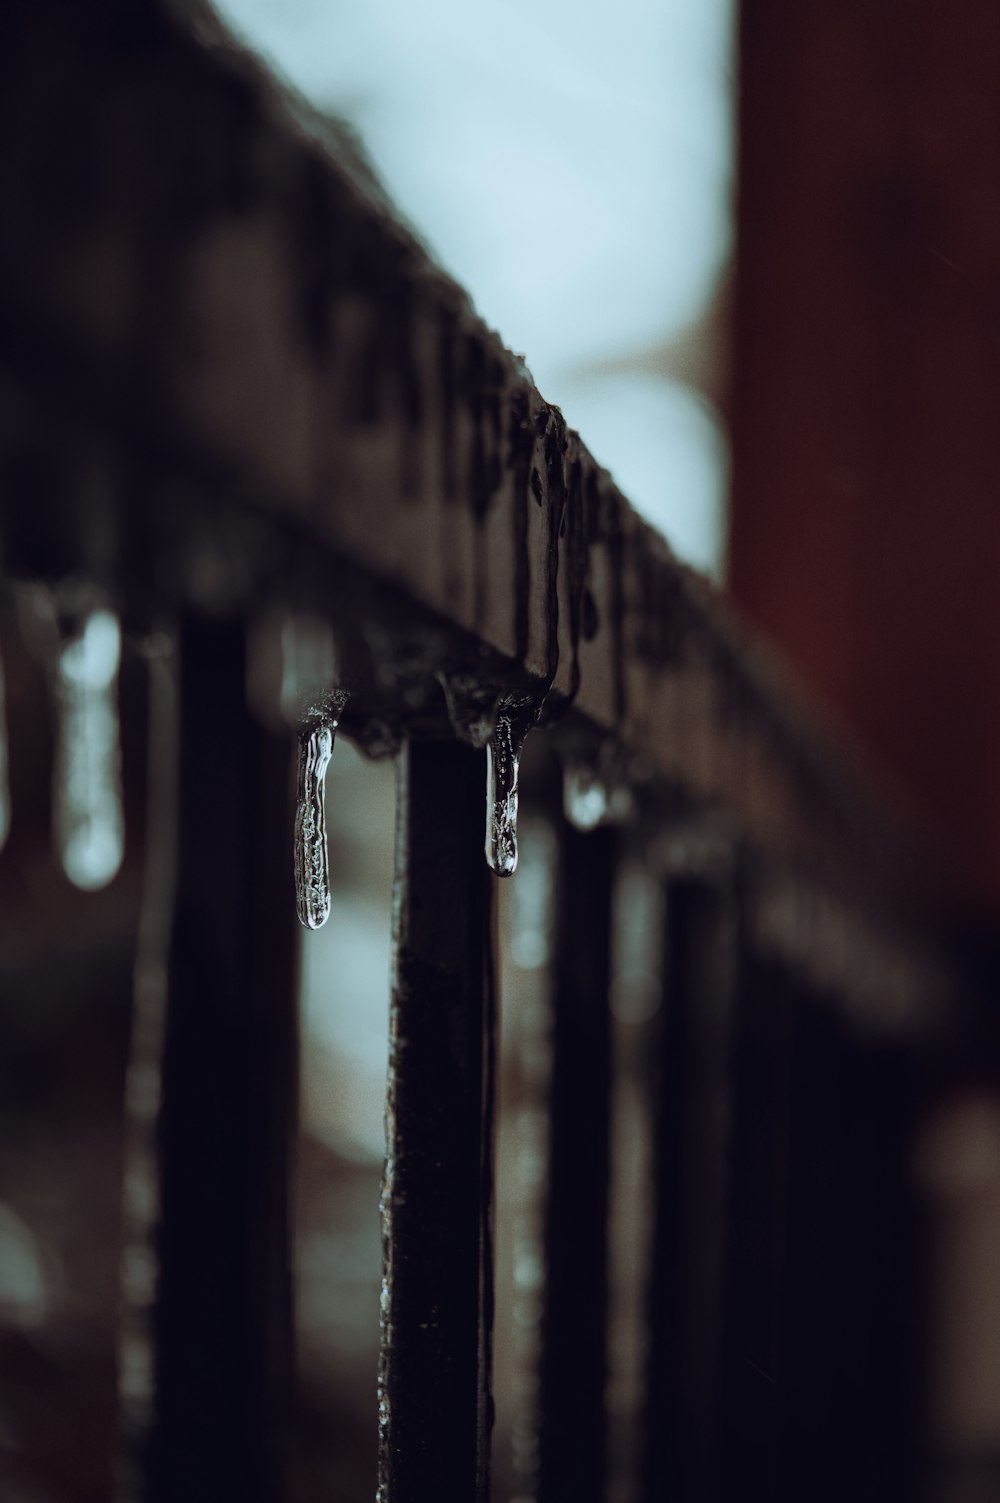 icicles hanging from a metal railing in the snow